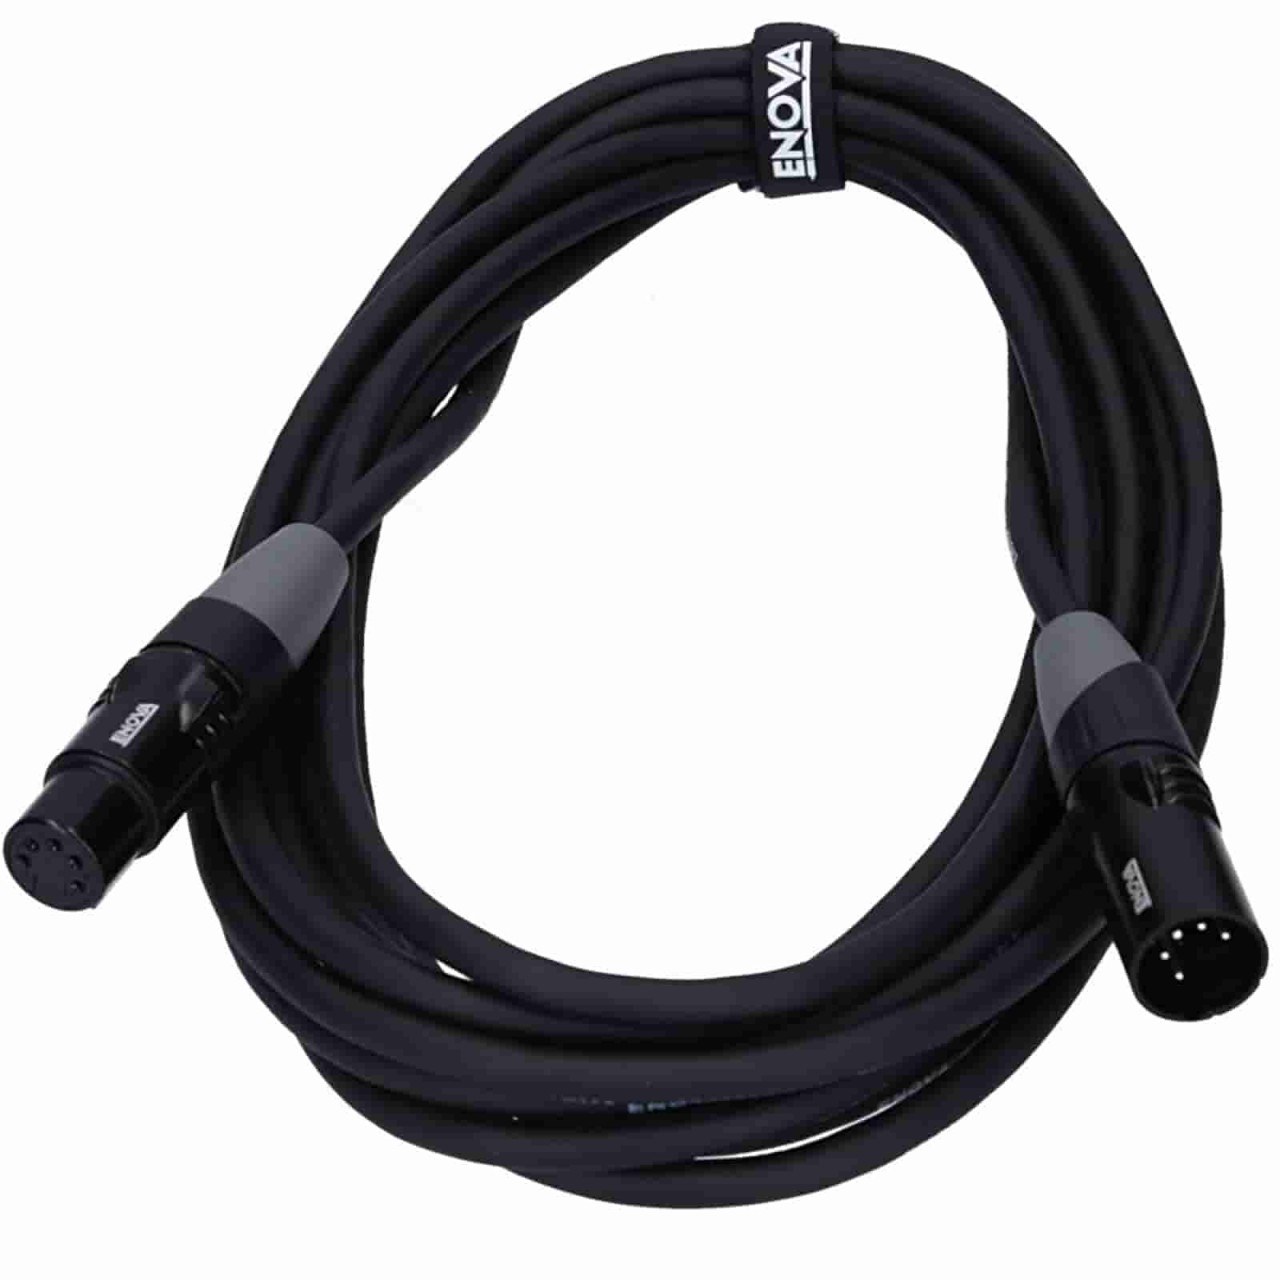 2 meter DMX cable with 5 pin XLR connector and velcro